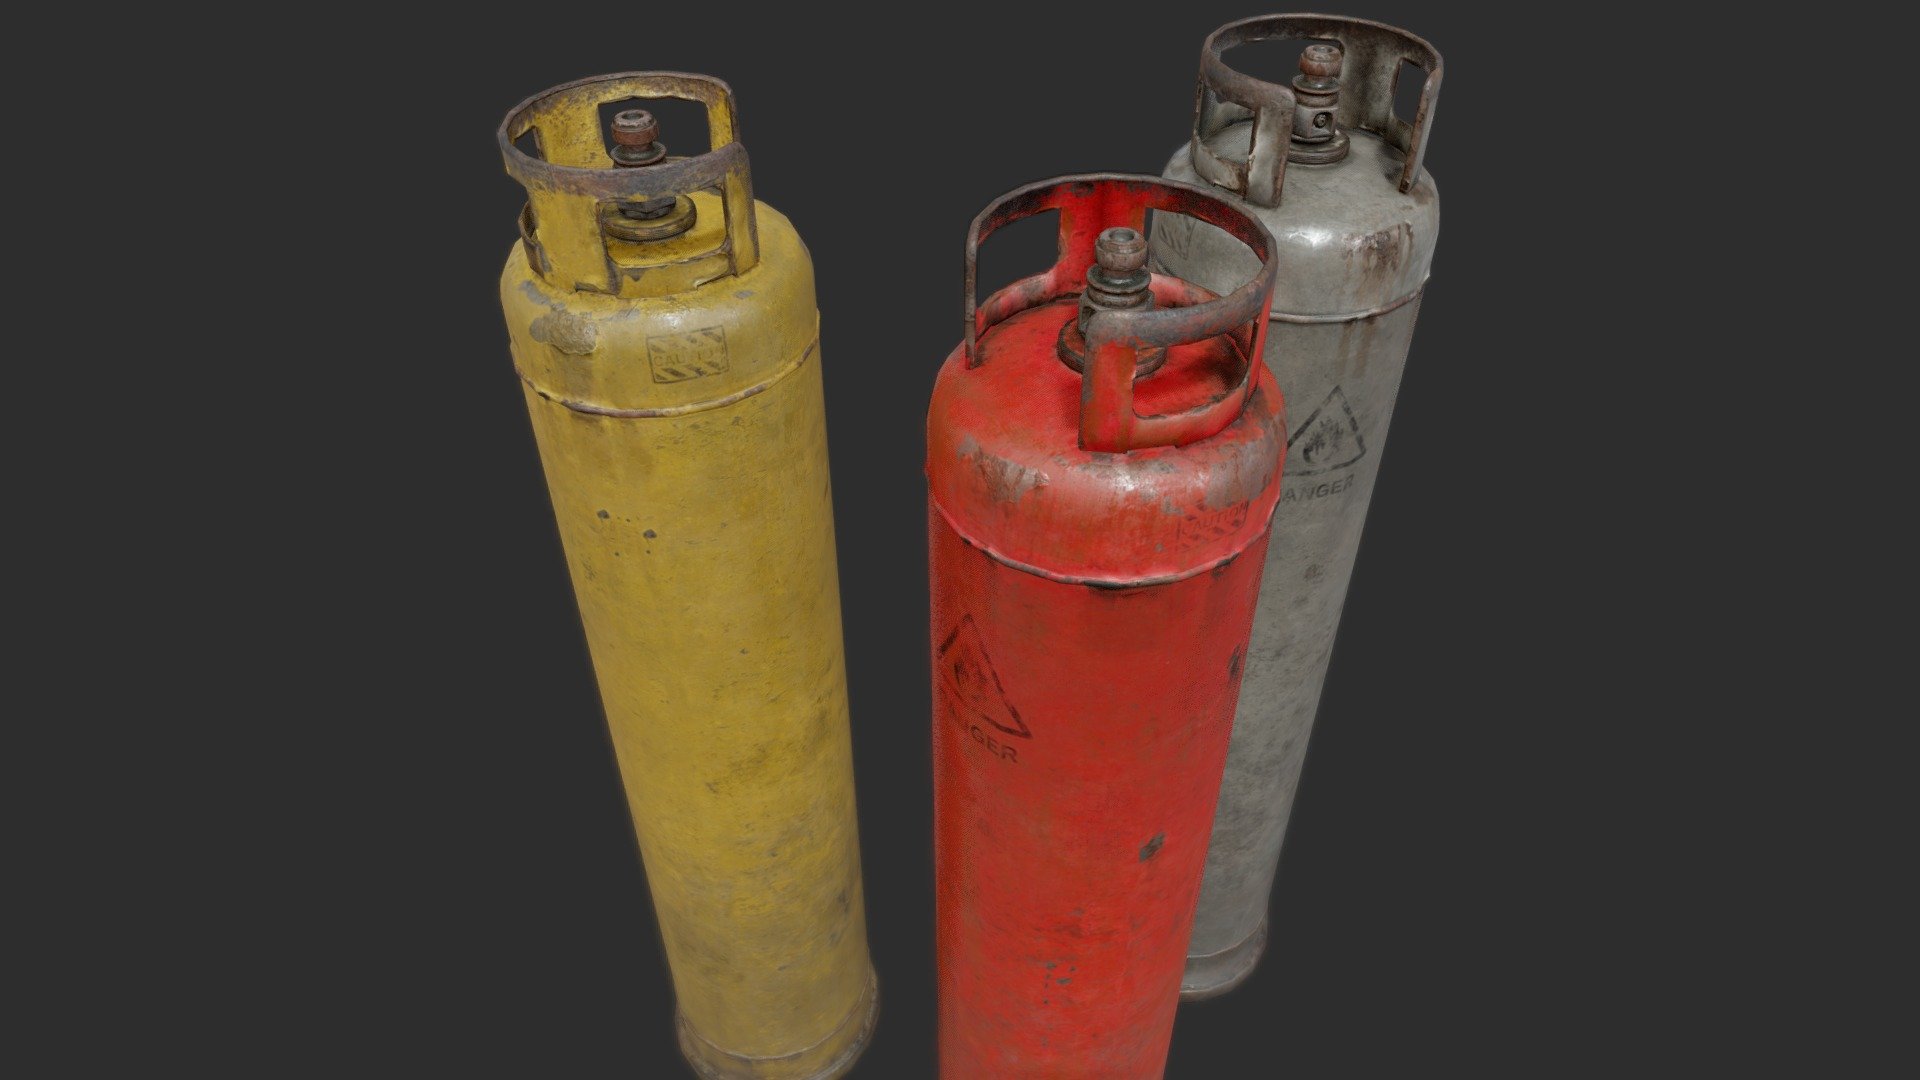 Propane Gas Cylinder 2 PBR

Very Detailed Low Poly Propane Gas Cylinder with High-Quality PBR Texturing and 3 color variations

Fits perfect for any PBR game as Decoration or a Tool, or Explosive. 

The Mesh is unwrapped, and UV Mapped PBR Painted 

Standard Textures
Base Color, Metallic, Roughness, Height, AO, Normal, Maps

Unreal 4 Textures
Base Color, Normal, OcclusionRoughnessMetallic

Unity 5/2017 Textures
Albedo, SpecularSmoothness, Normal, and AO Maps

4096x4096 TGA Textures

Please Note, this PBR Textures Only. 

Low Poly Triangles 

5442 Tris
2764 Verts

File Formats :

.Max2018
.Max2017
.Max2016
.Max2015
.FBX
.OBJ
.3DS
.DAE - Propane Gas Cylinders 2 PBR - Buy Royalty Free 3D model by GamePoly (@triix3d) 3d model